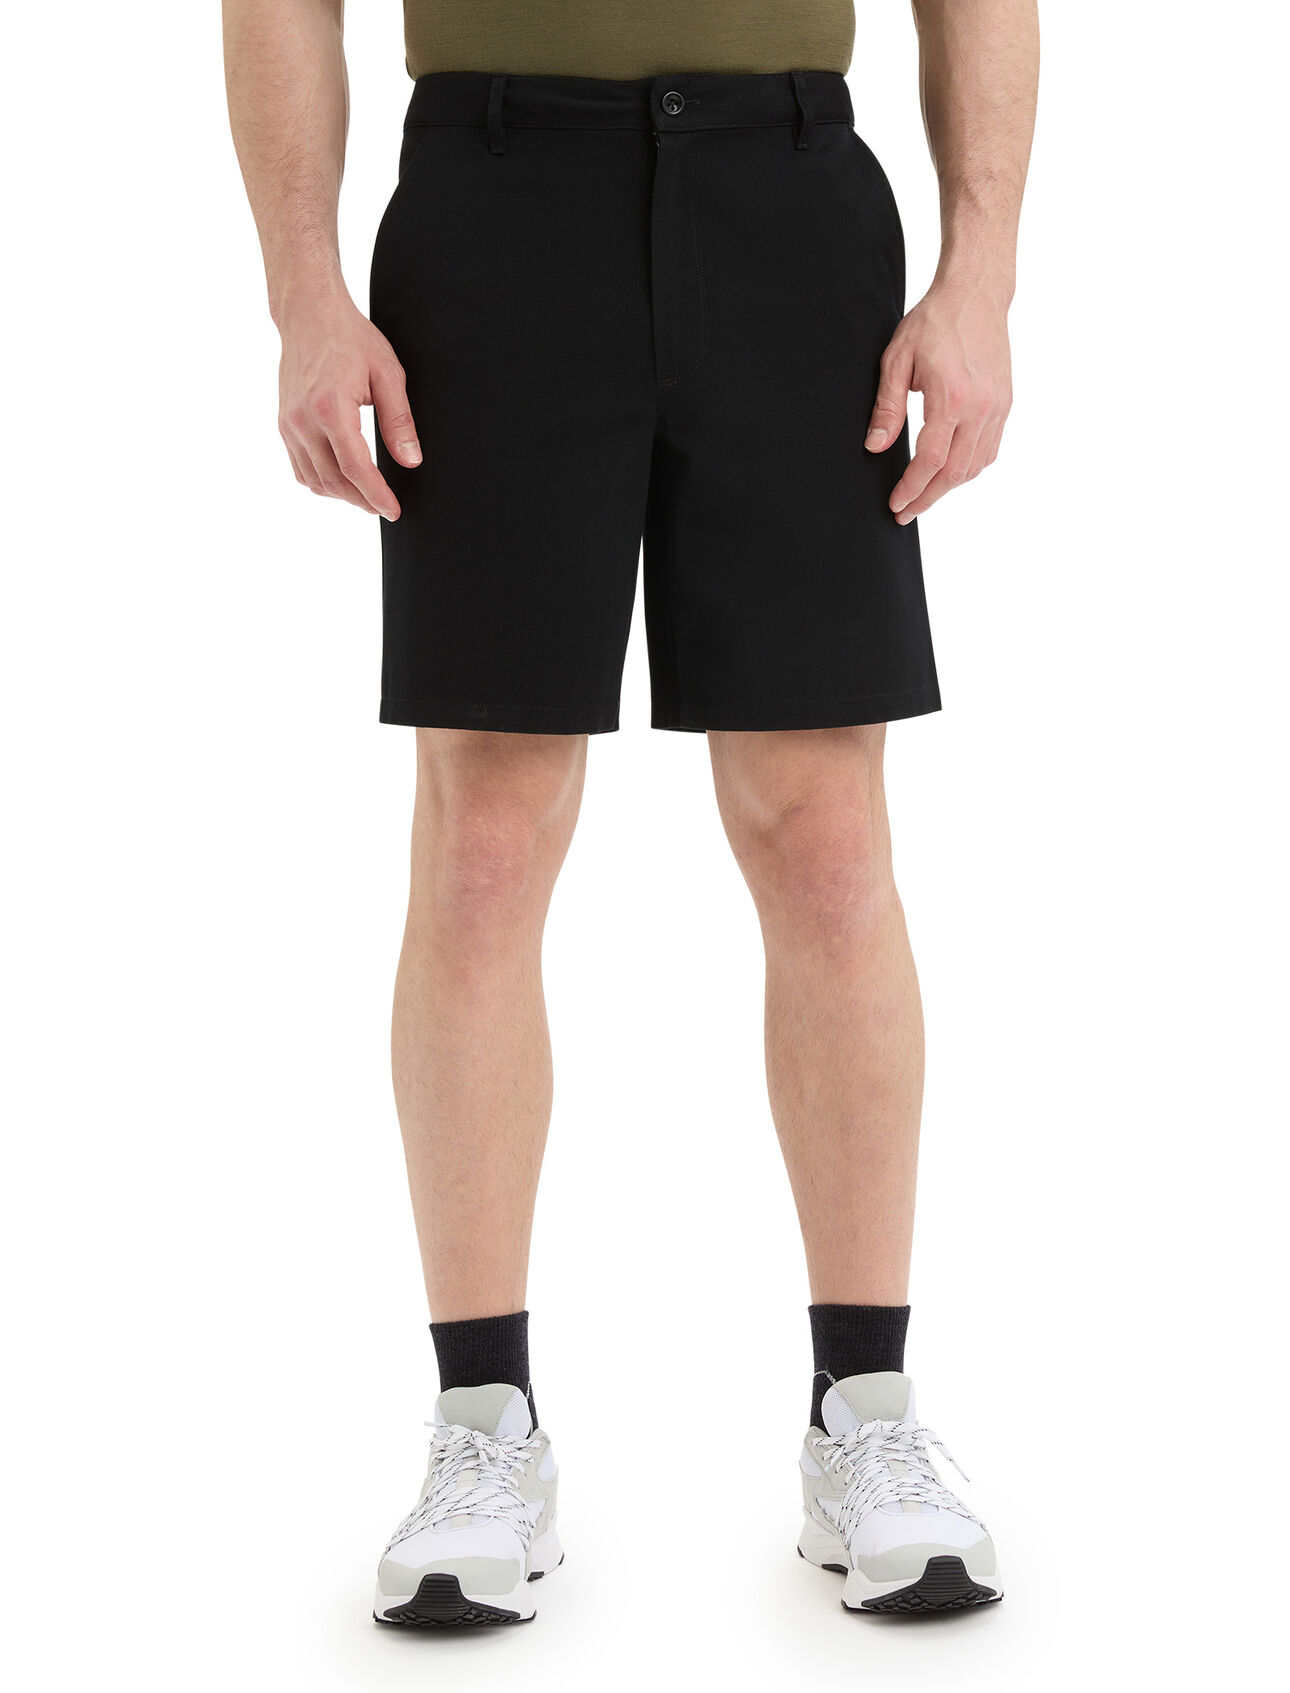 dla mężczyzn Merino Berlin Shorts A classic and versatile chino short, the Berlin Shorts feature a unique  blend of natural merino wool and organically grown cotton.